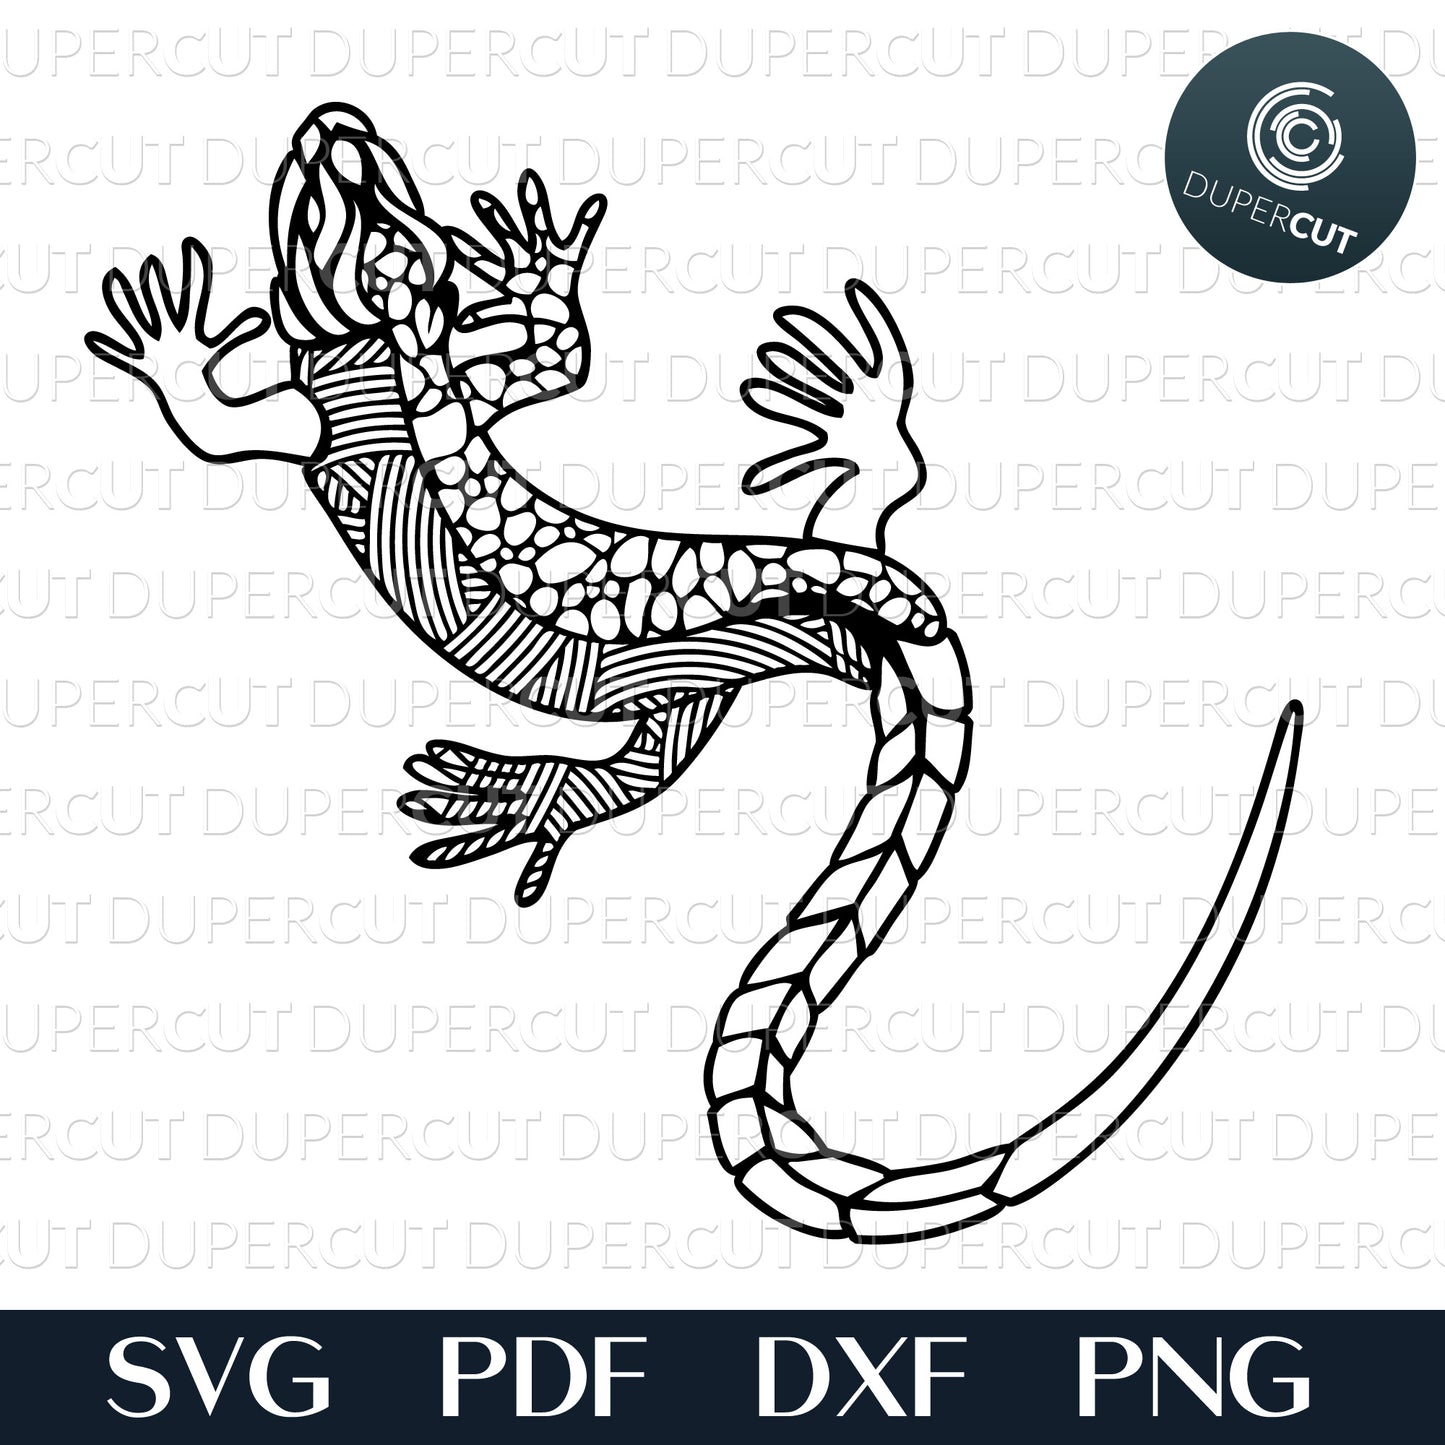 Gecko lizard, tattoo line art. SVG PNG DXF files for cutting, laser engraving, scrapbooking. For use with Cricut, Glowforge, Silhouette, CNC machines.